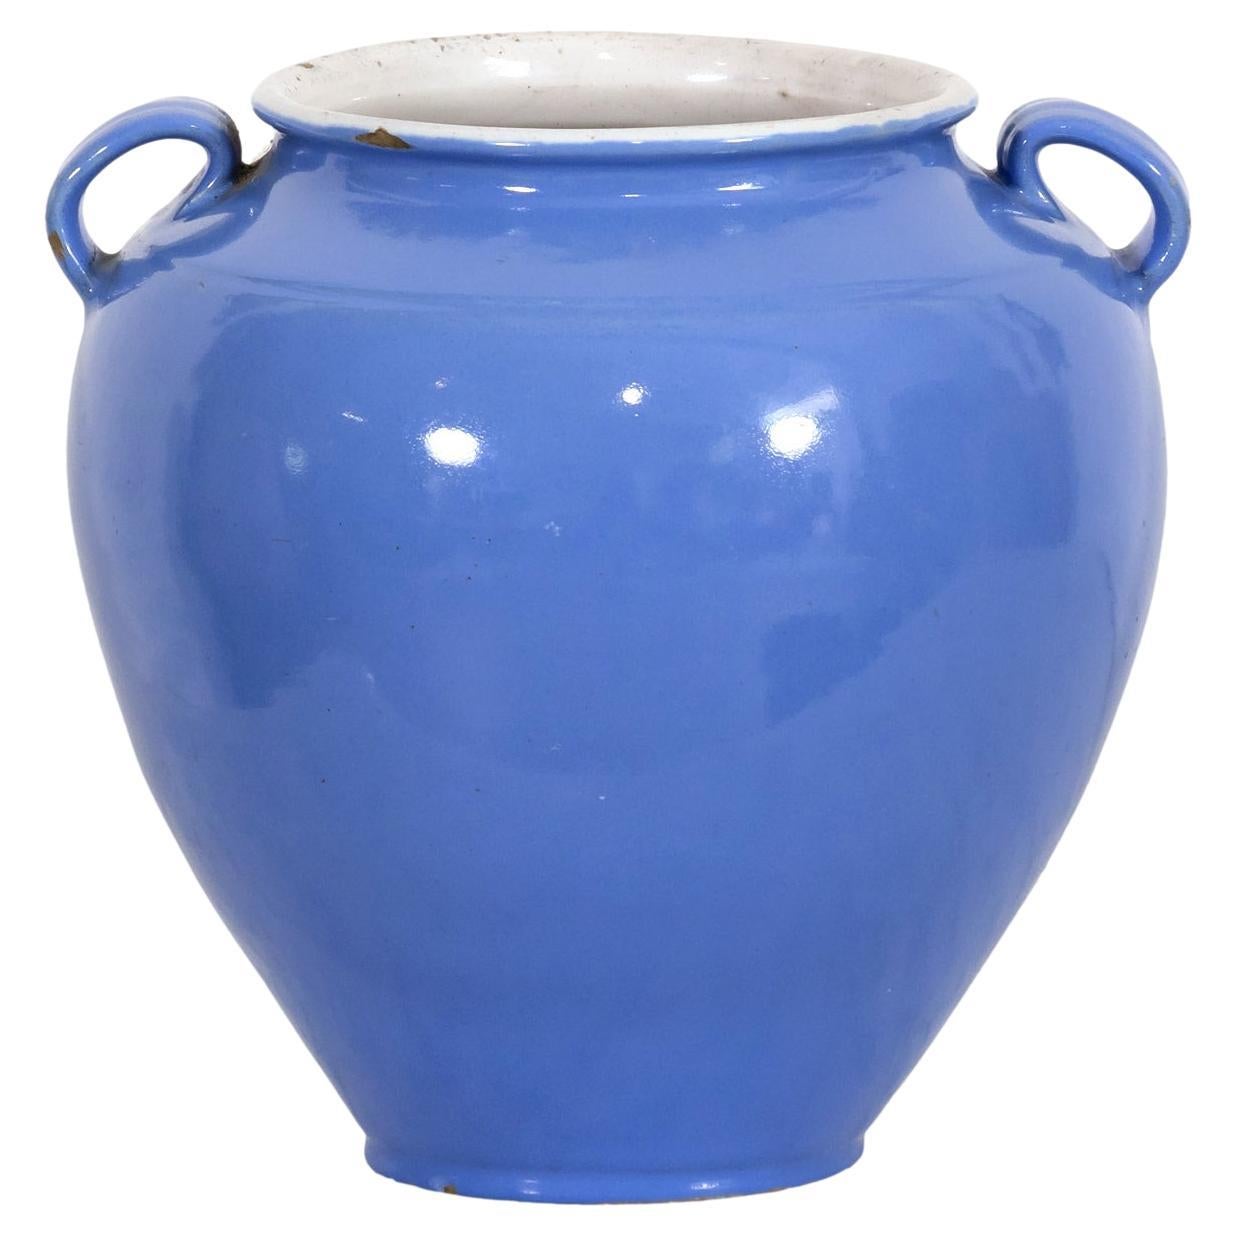 Rare 19th Century French Confit Pot or Egg Pot with Blue Glaze For Sale